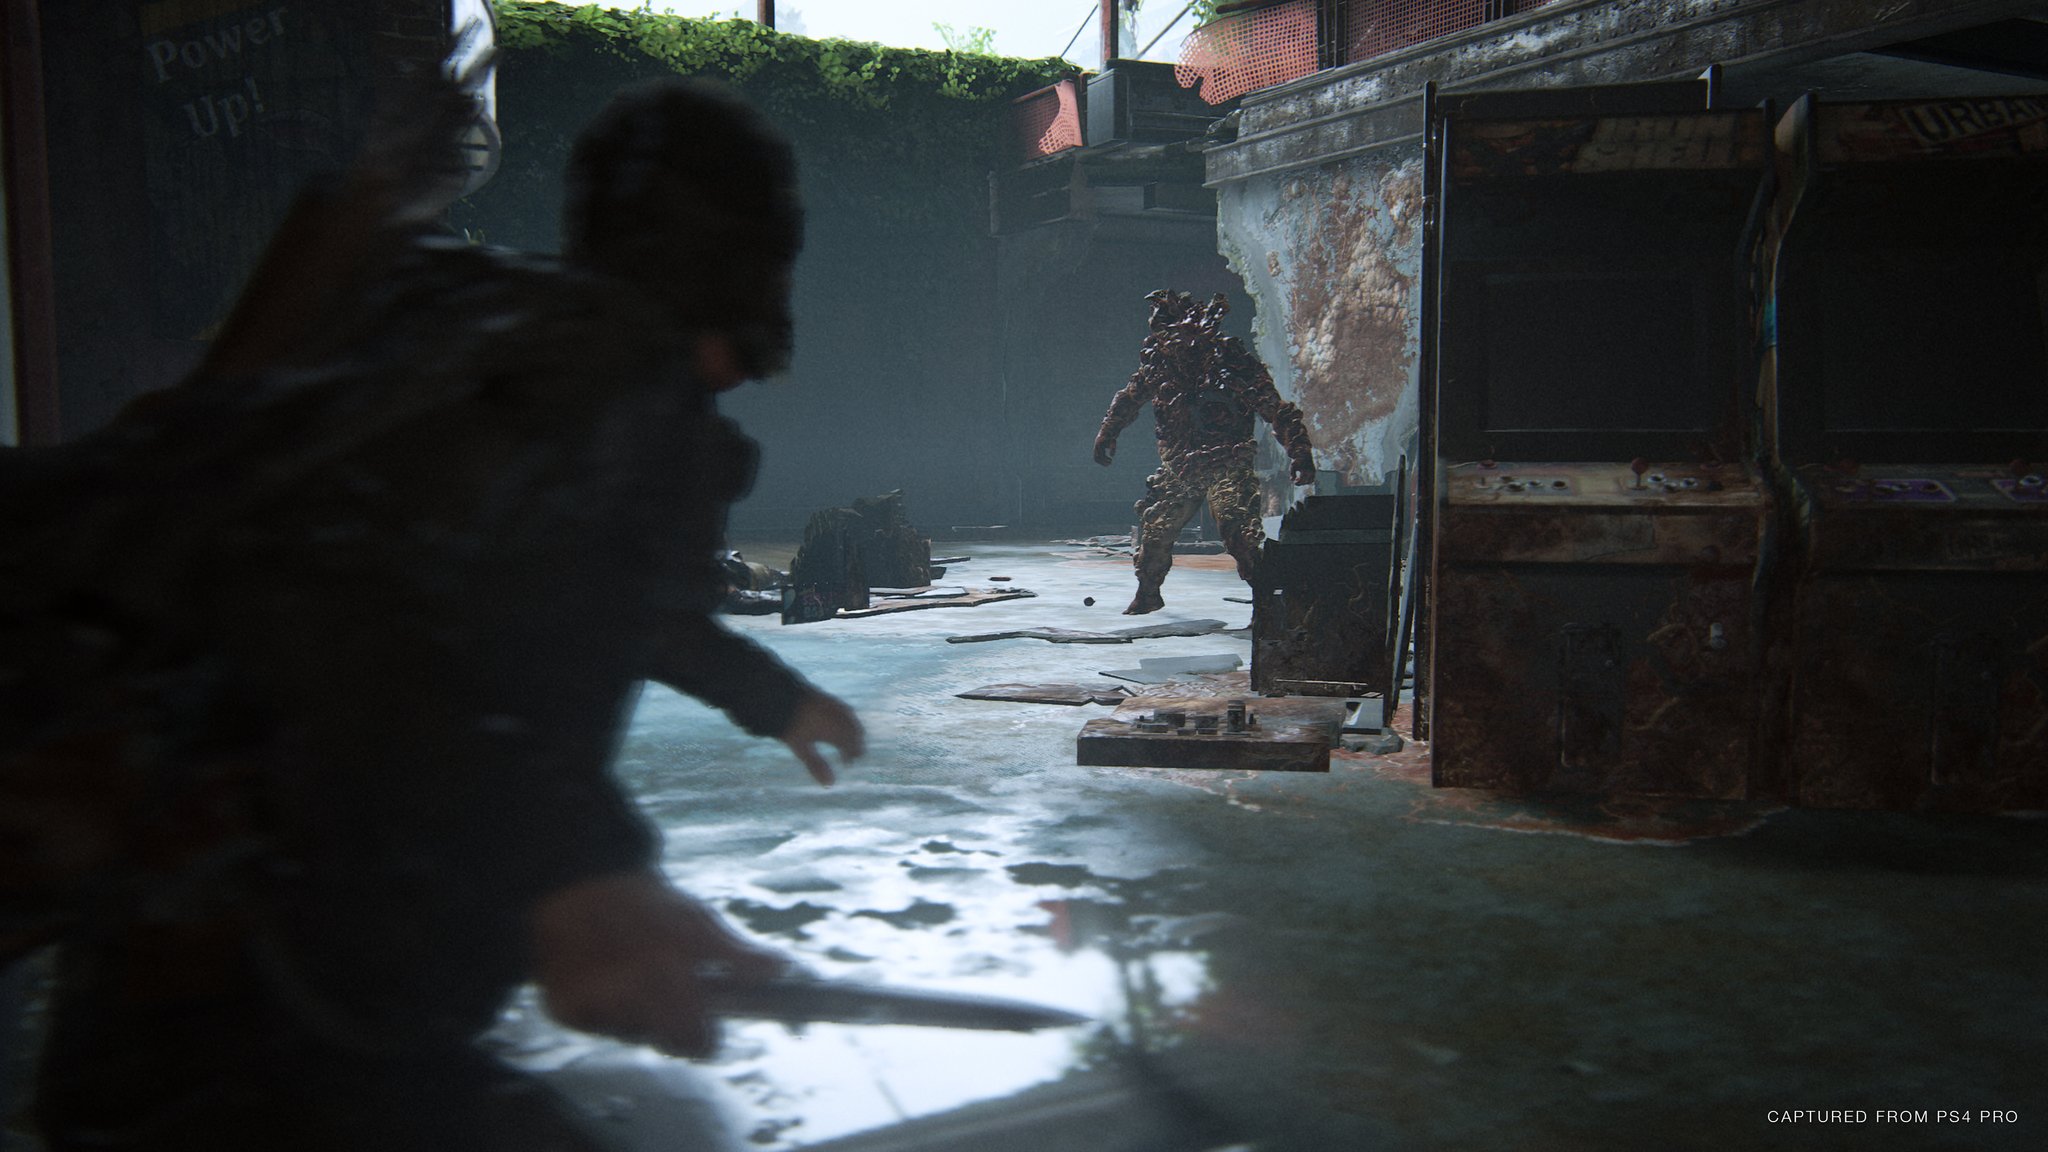 The Last of Us Season 2: More Infected, Action and Clickers